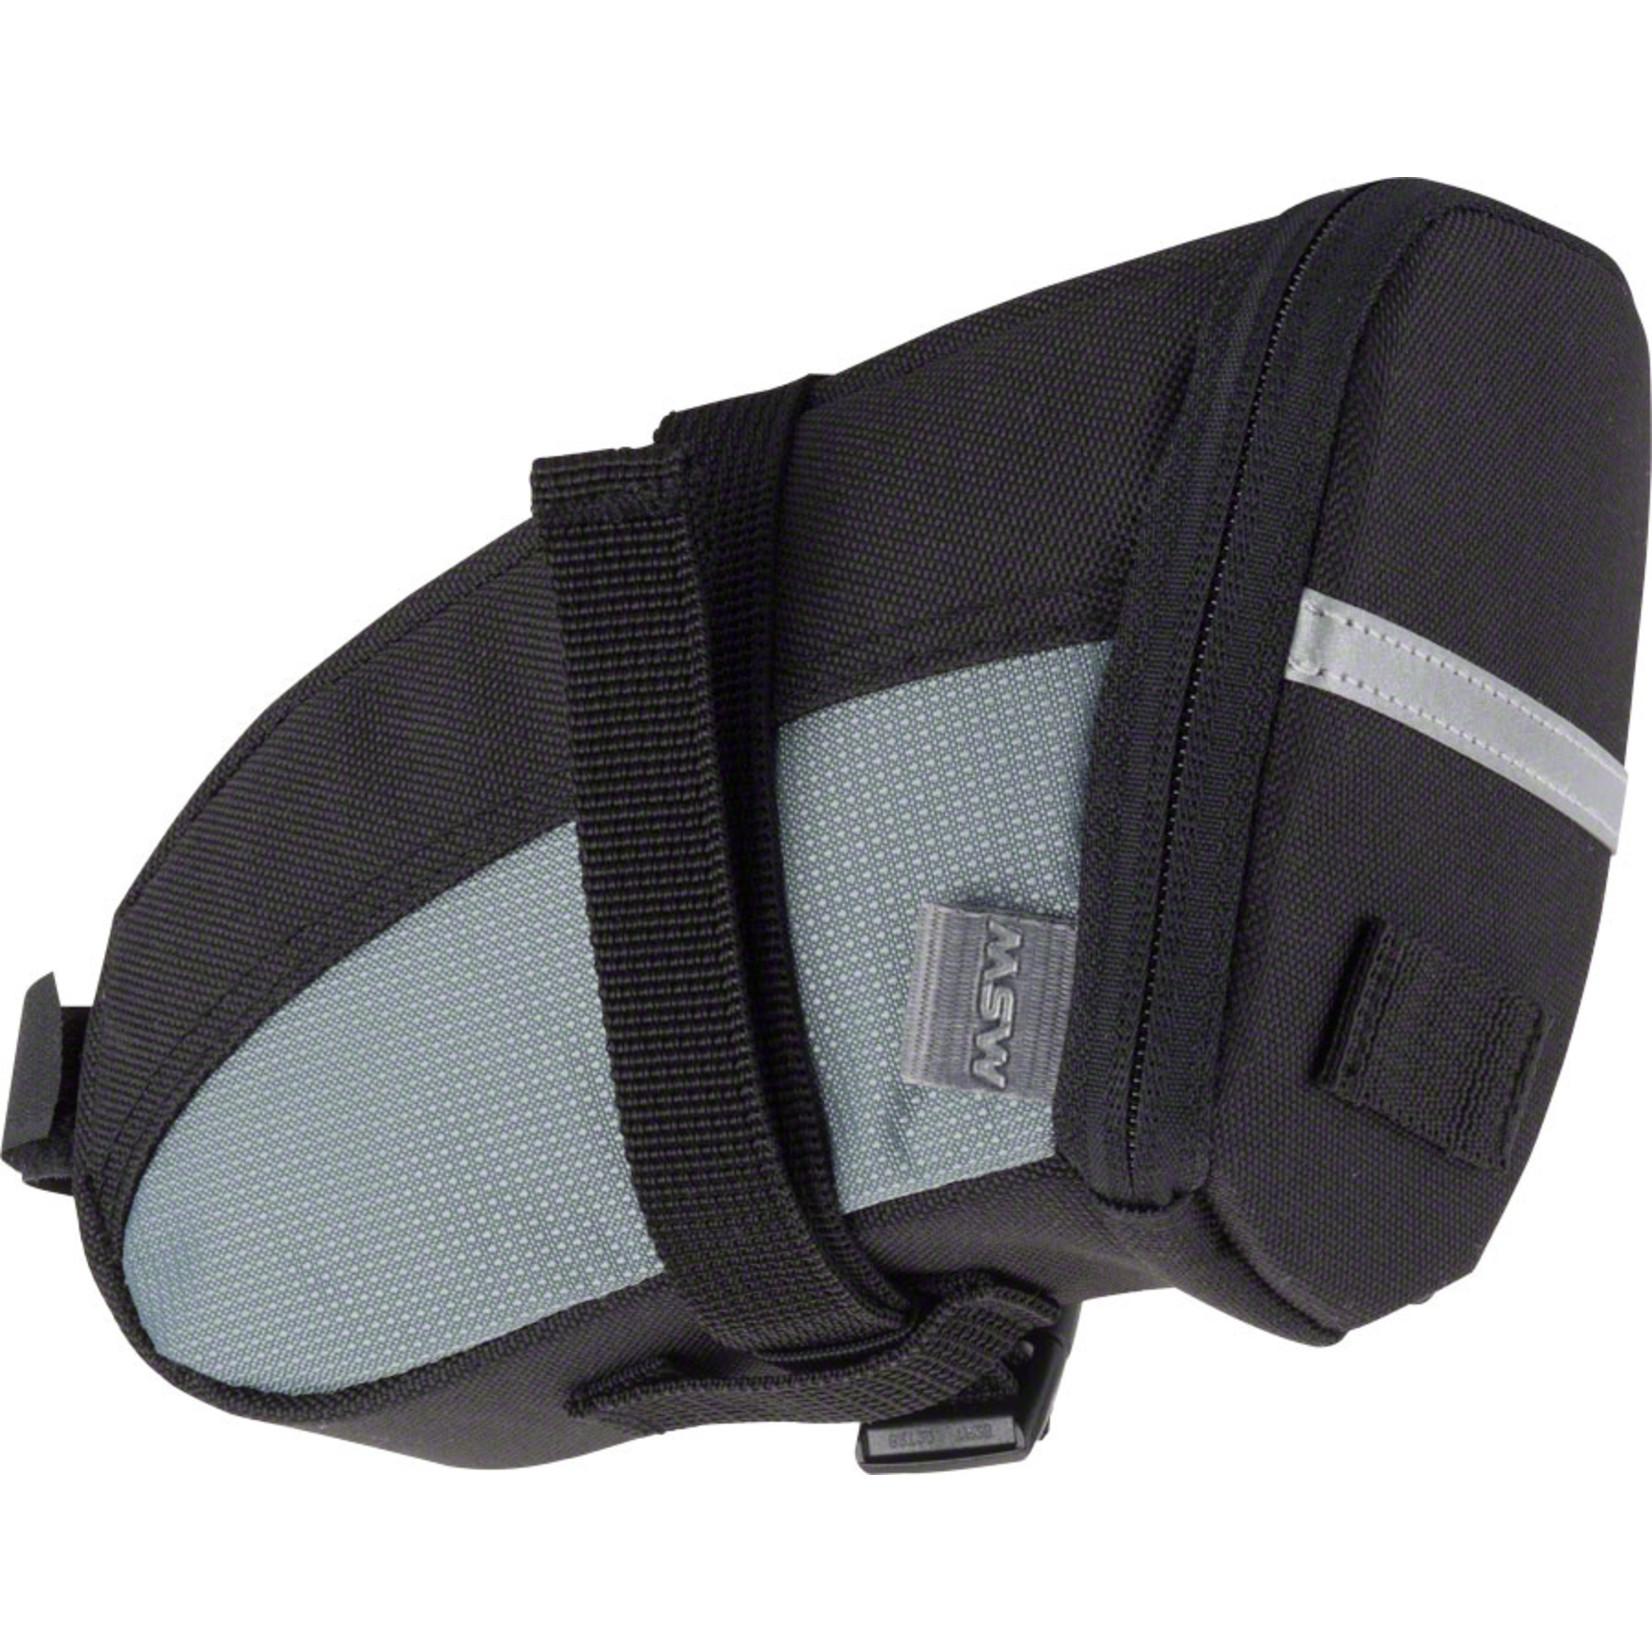 MSW MSW Brand New Bag, SBG-100 Seat Bag, Black/Gray, MD